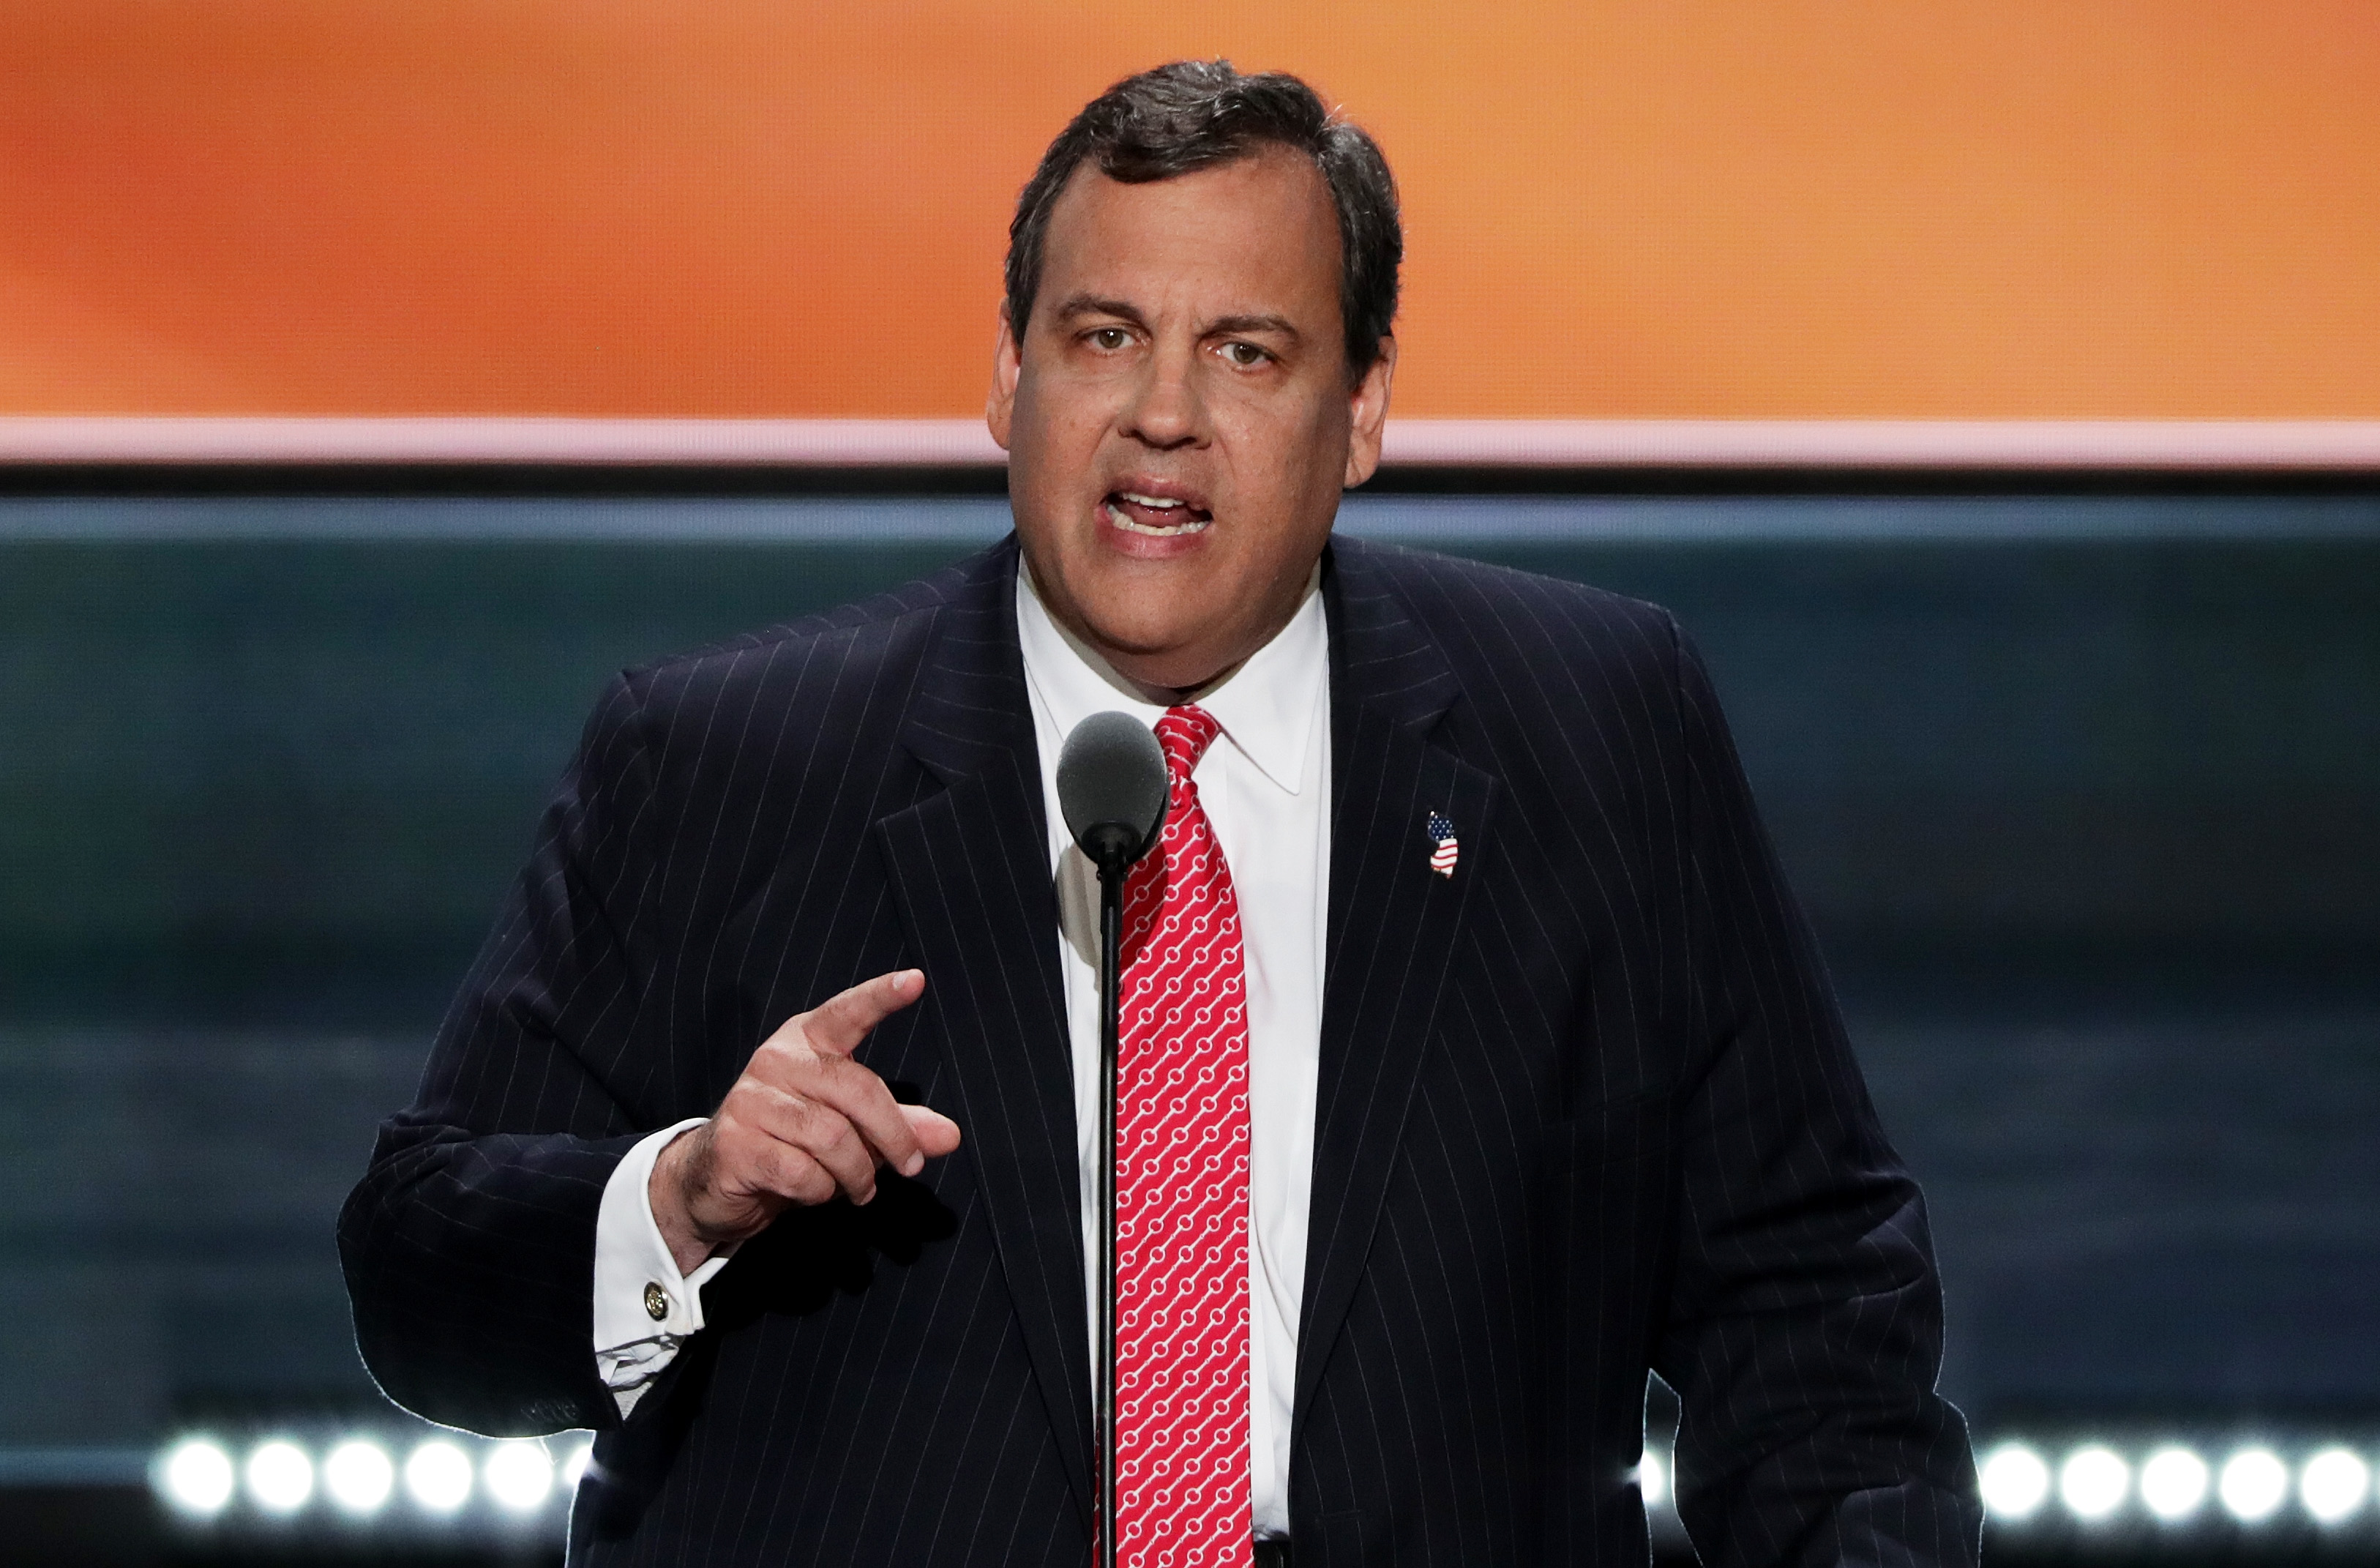 CLEVELAND, OH - JULY 19: New Jersey Gov. Chris Christie delivers a speech on the second day of the Republican National Convention on July 19, 2016 at the Quicken Loans Arena in Cleveland, Ohio. Republican presidential candidate Donald Trump received the number of votes needed to secure the party's nomination. An estimated 50,000 people are expected in Cleveland, including hundreds of protesters and members of the media. The four-day Republican National Convention kicked off on July 18.   Alex Wong/Getty Images/AFP